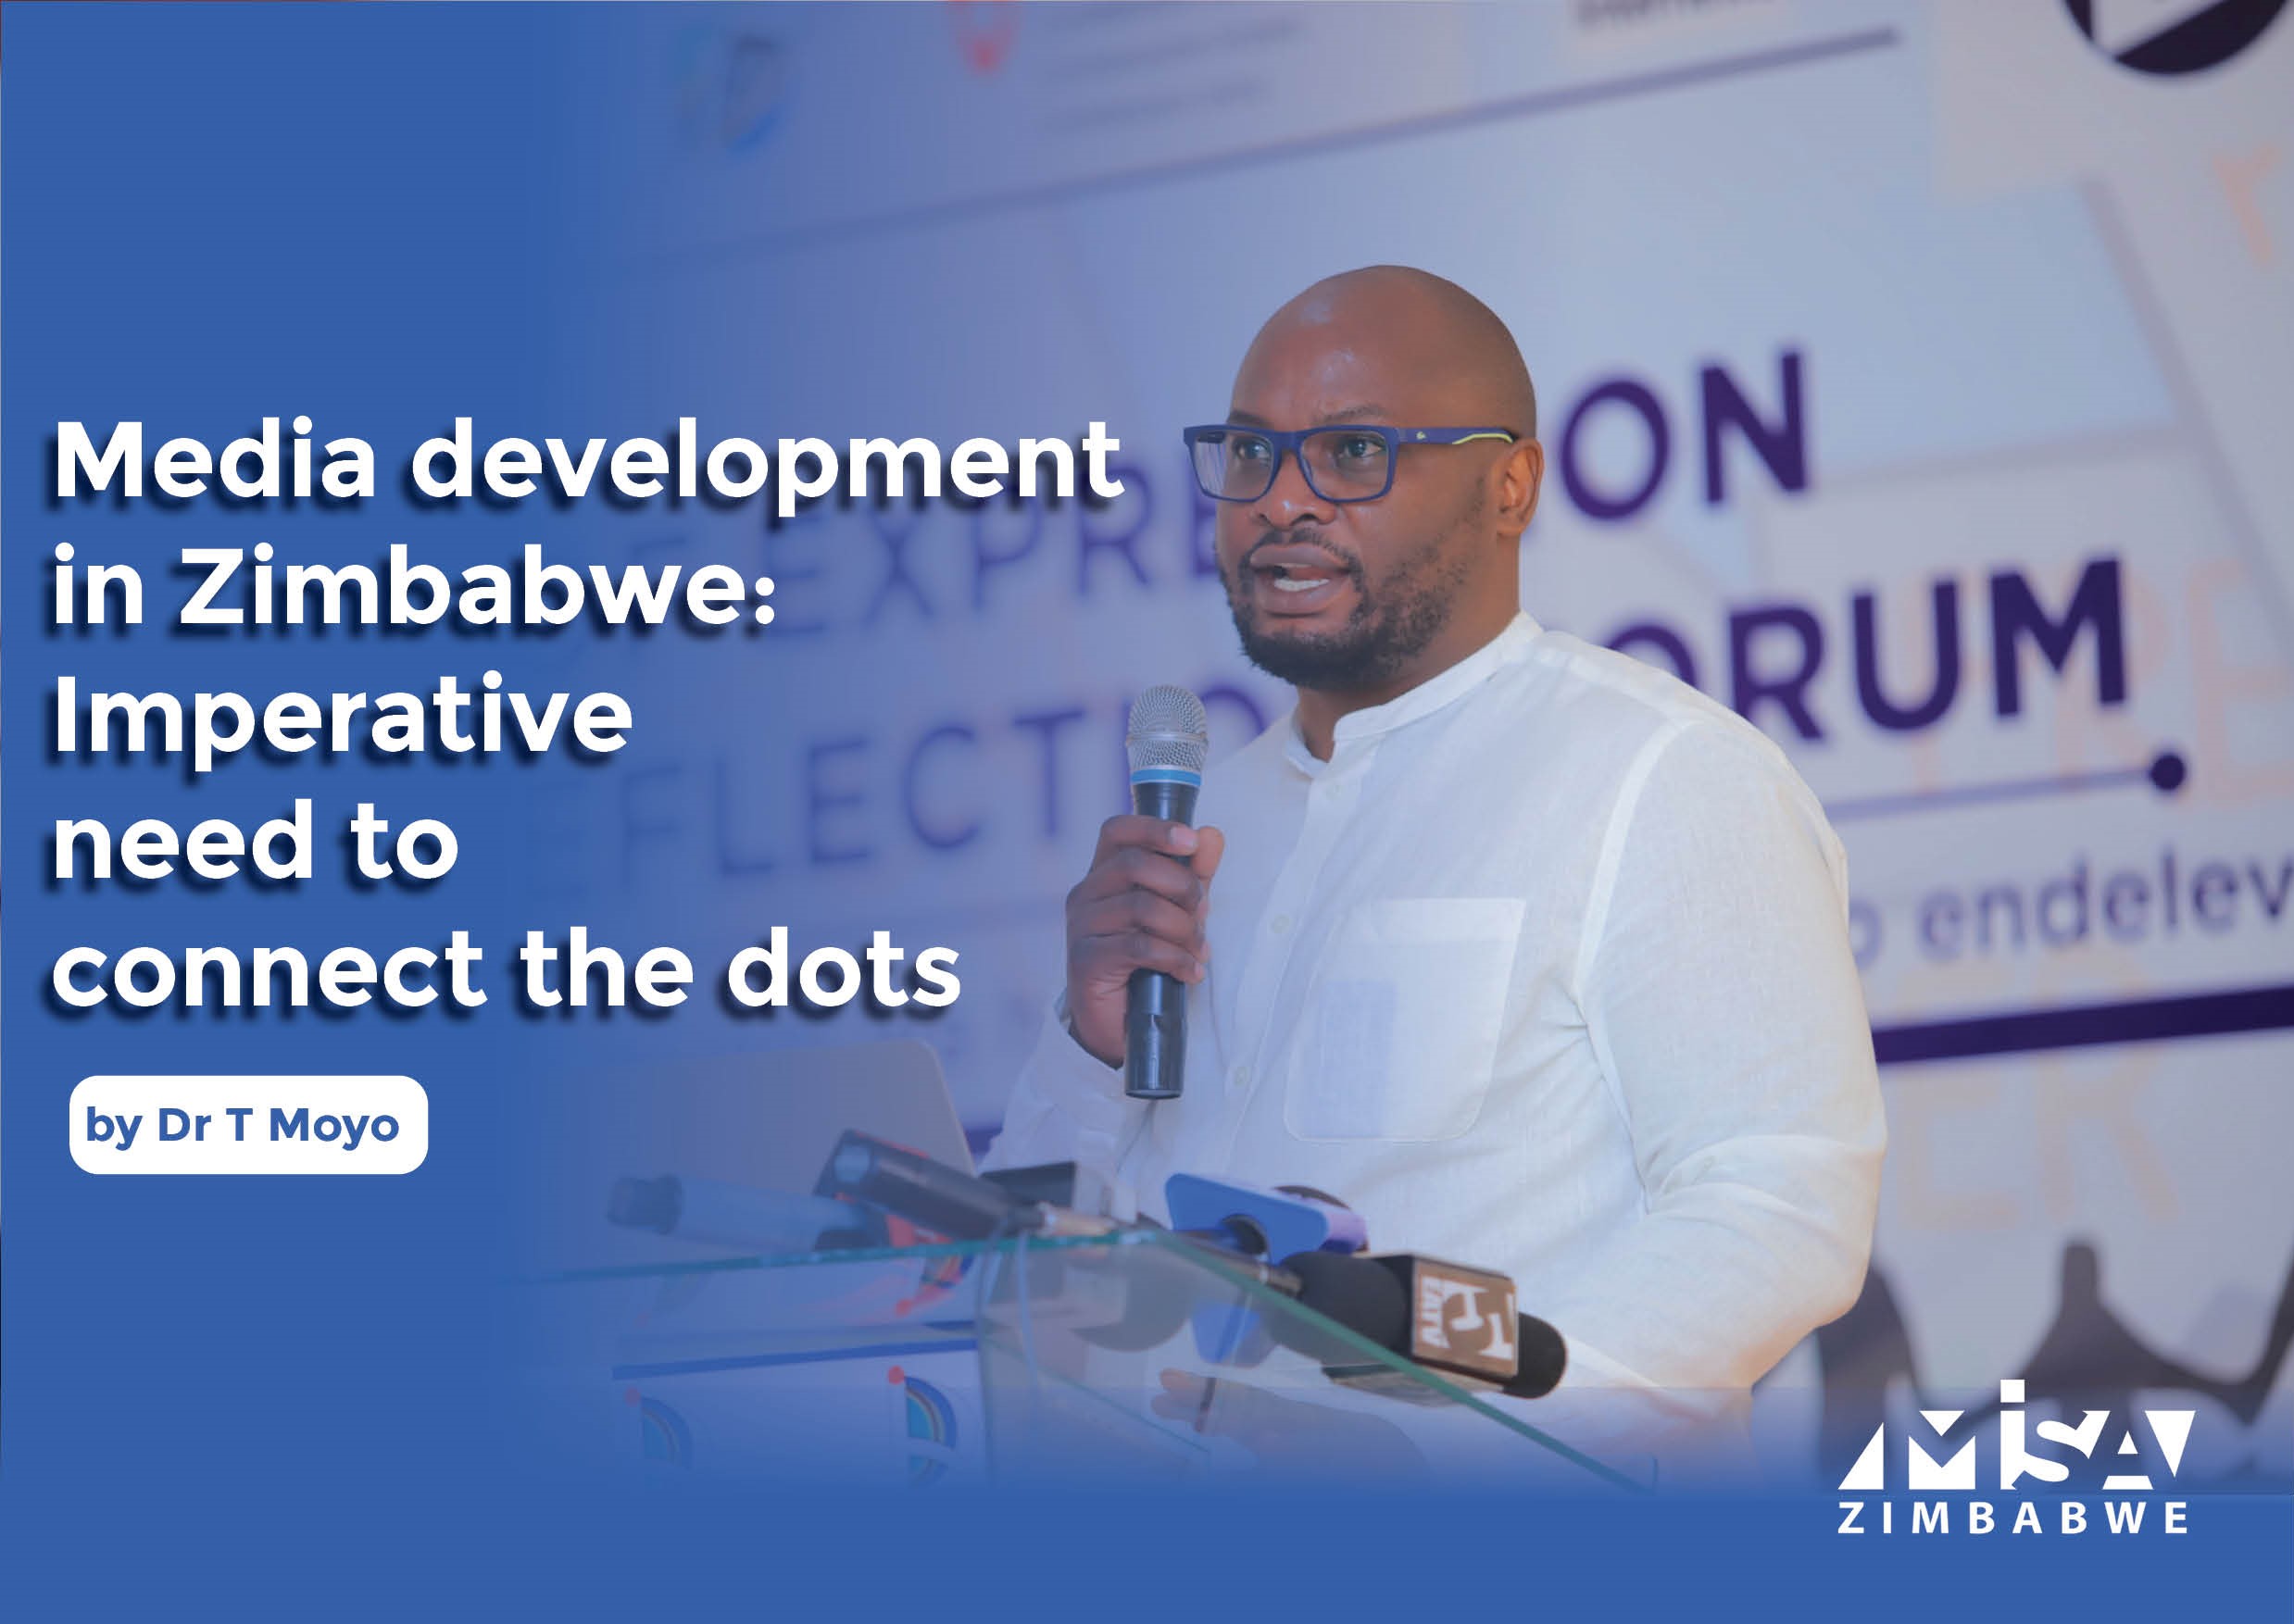 Media development in Zimbabwe: Imperative need to connect the dots